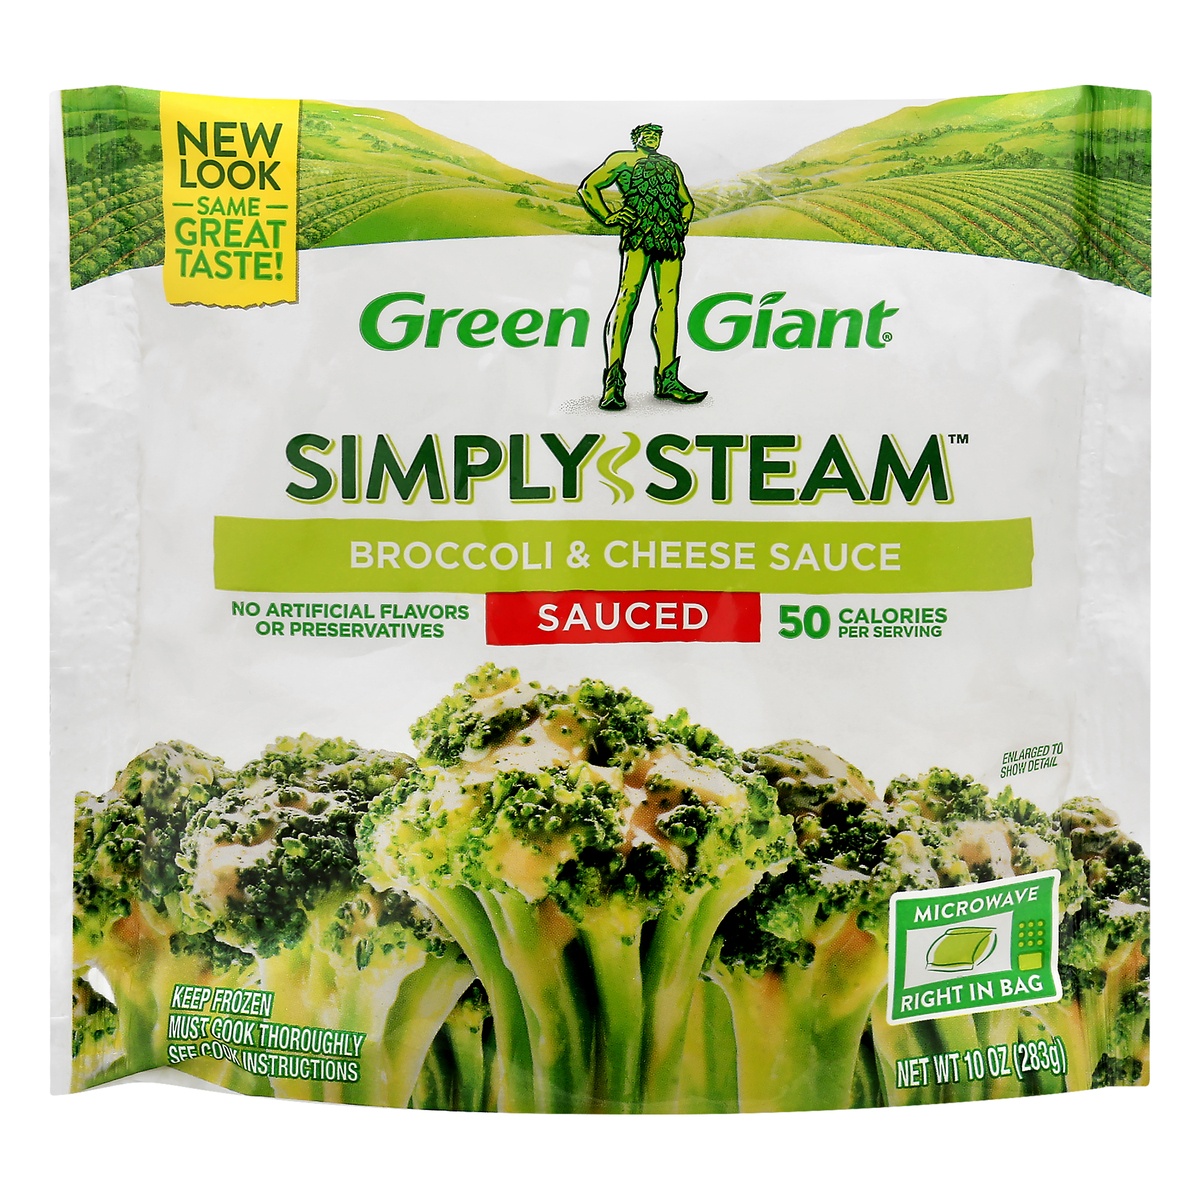 slide 1 of 1, Green Giant Simply Steam Sauced Broccoli & Cheese Sauce 10 oz, 12 oz